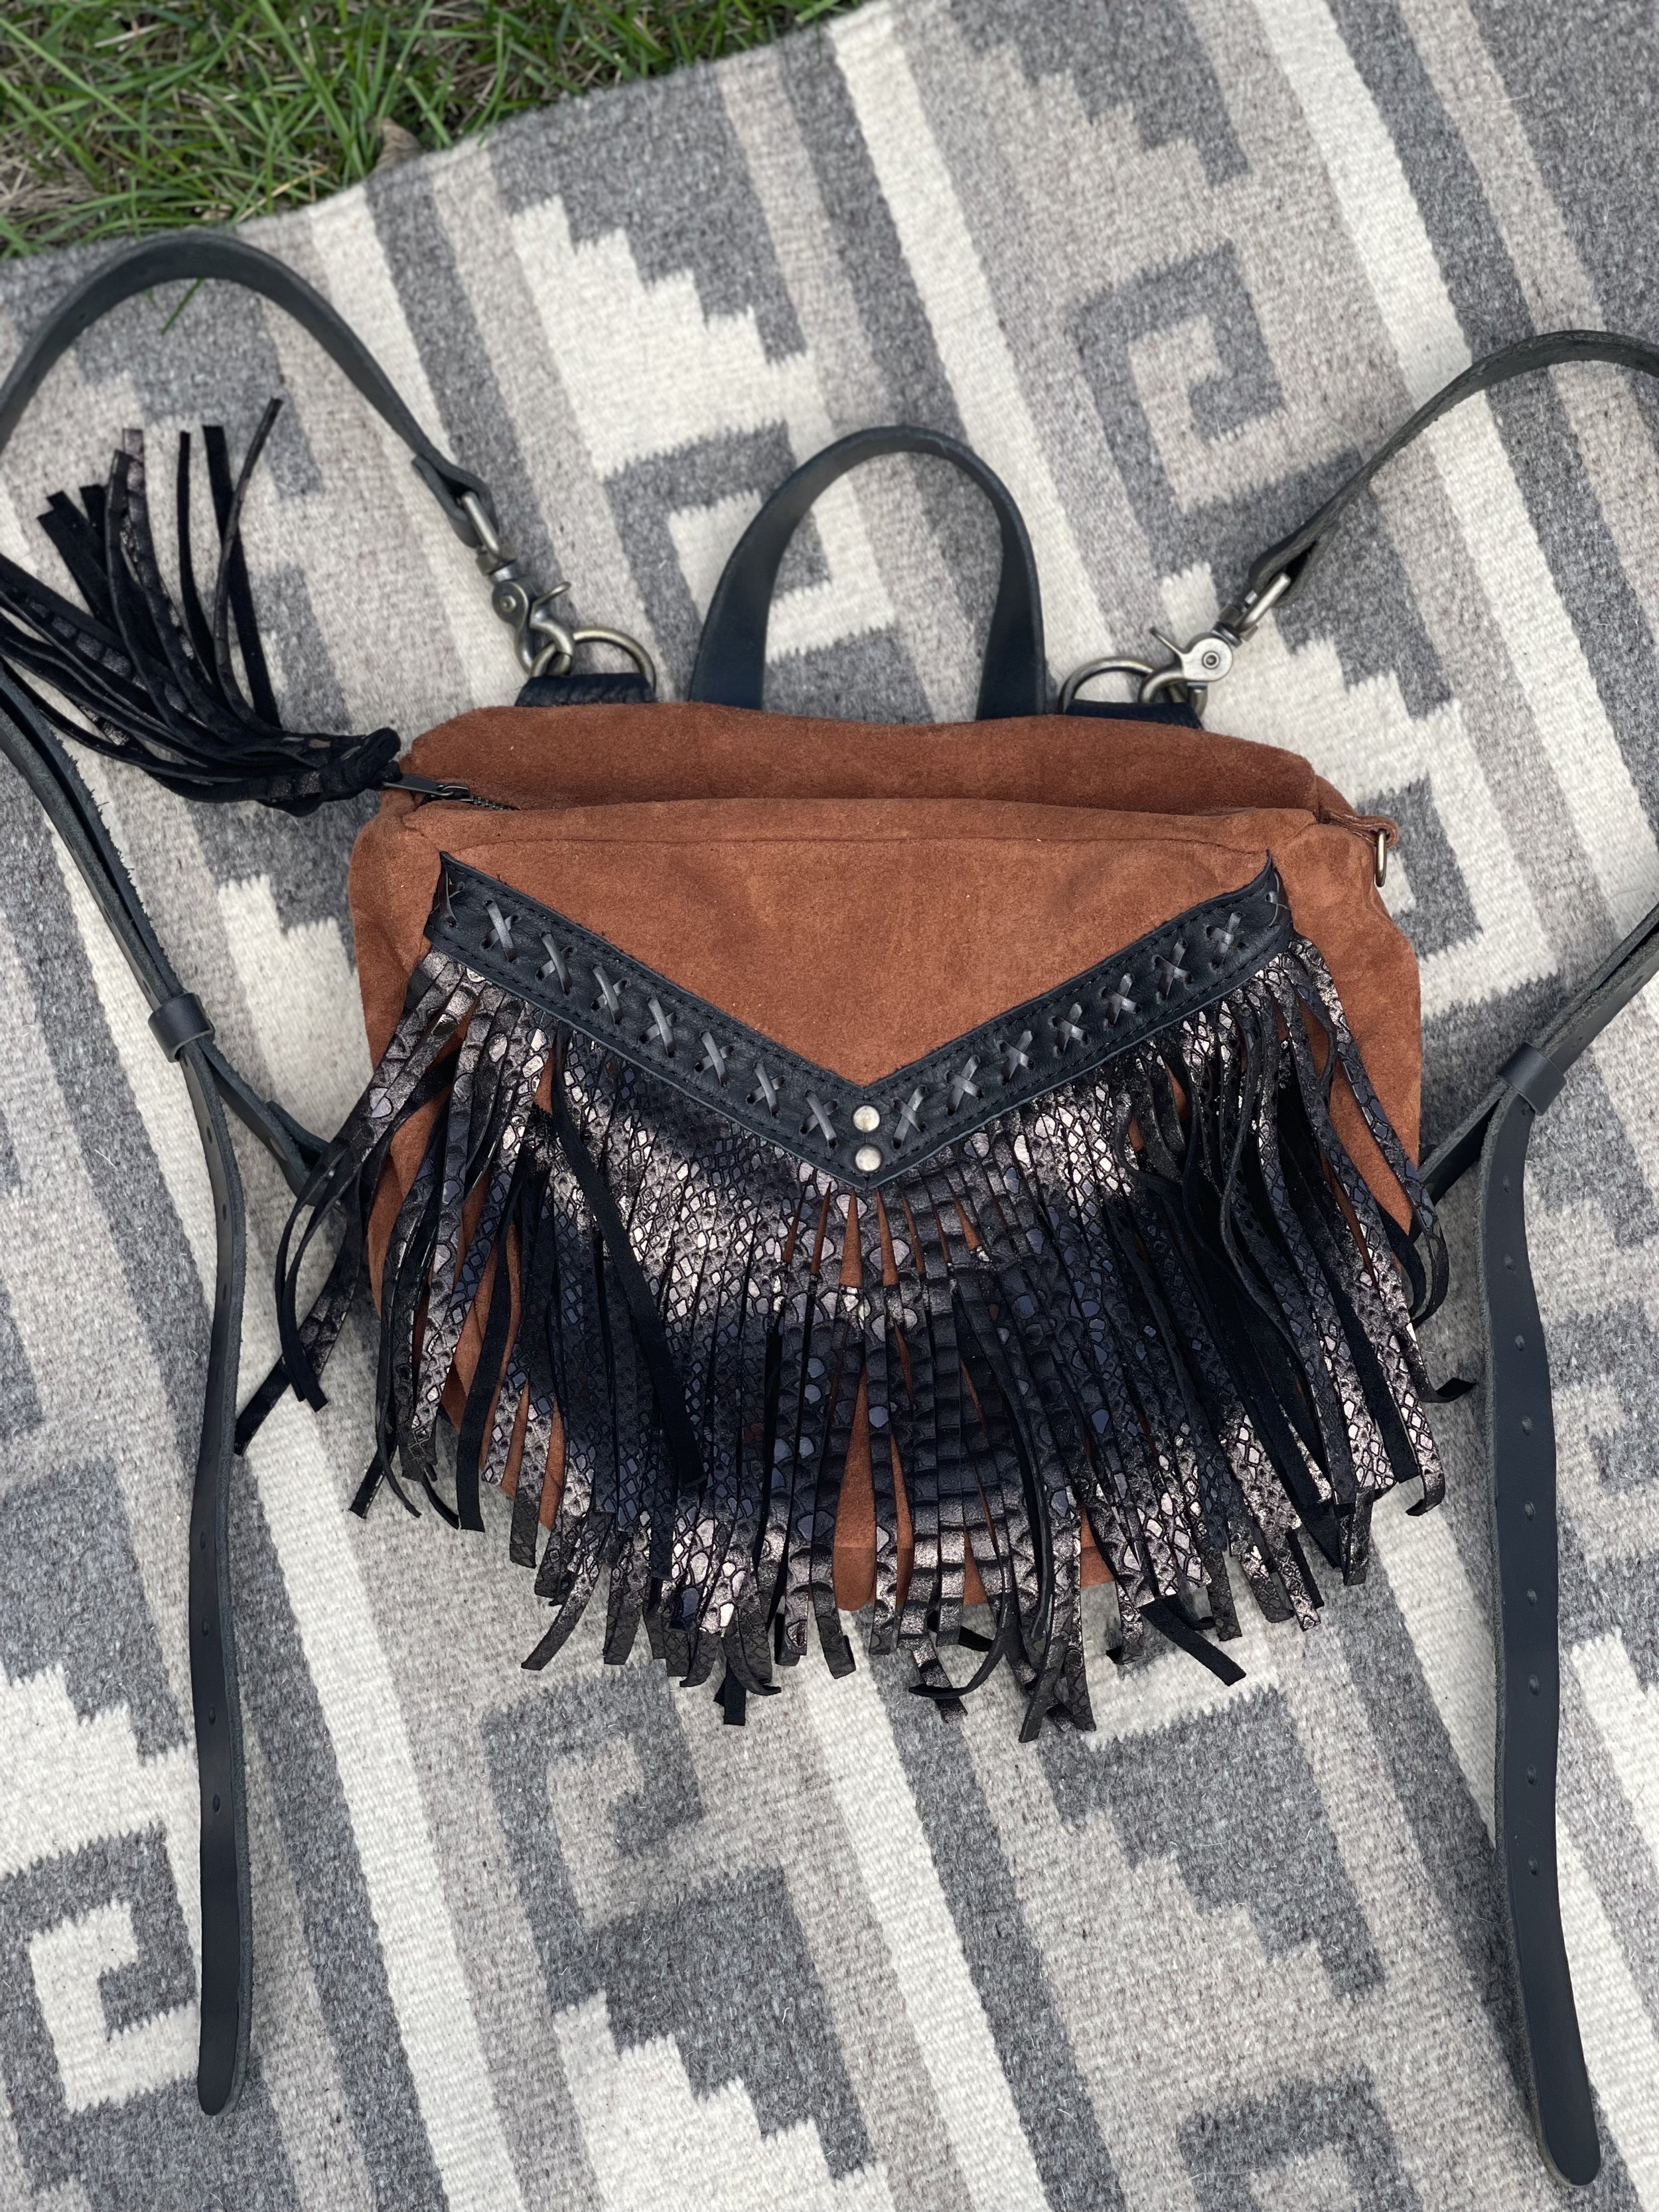 Mini Melissa Convertible Bag - Mahogany suede, Black Bison leather fringe border and D-Ring tabs, Black Python Fringe, Black Lace X Stitch, 1 simple leather handle, flair D-ring